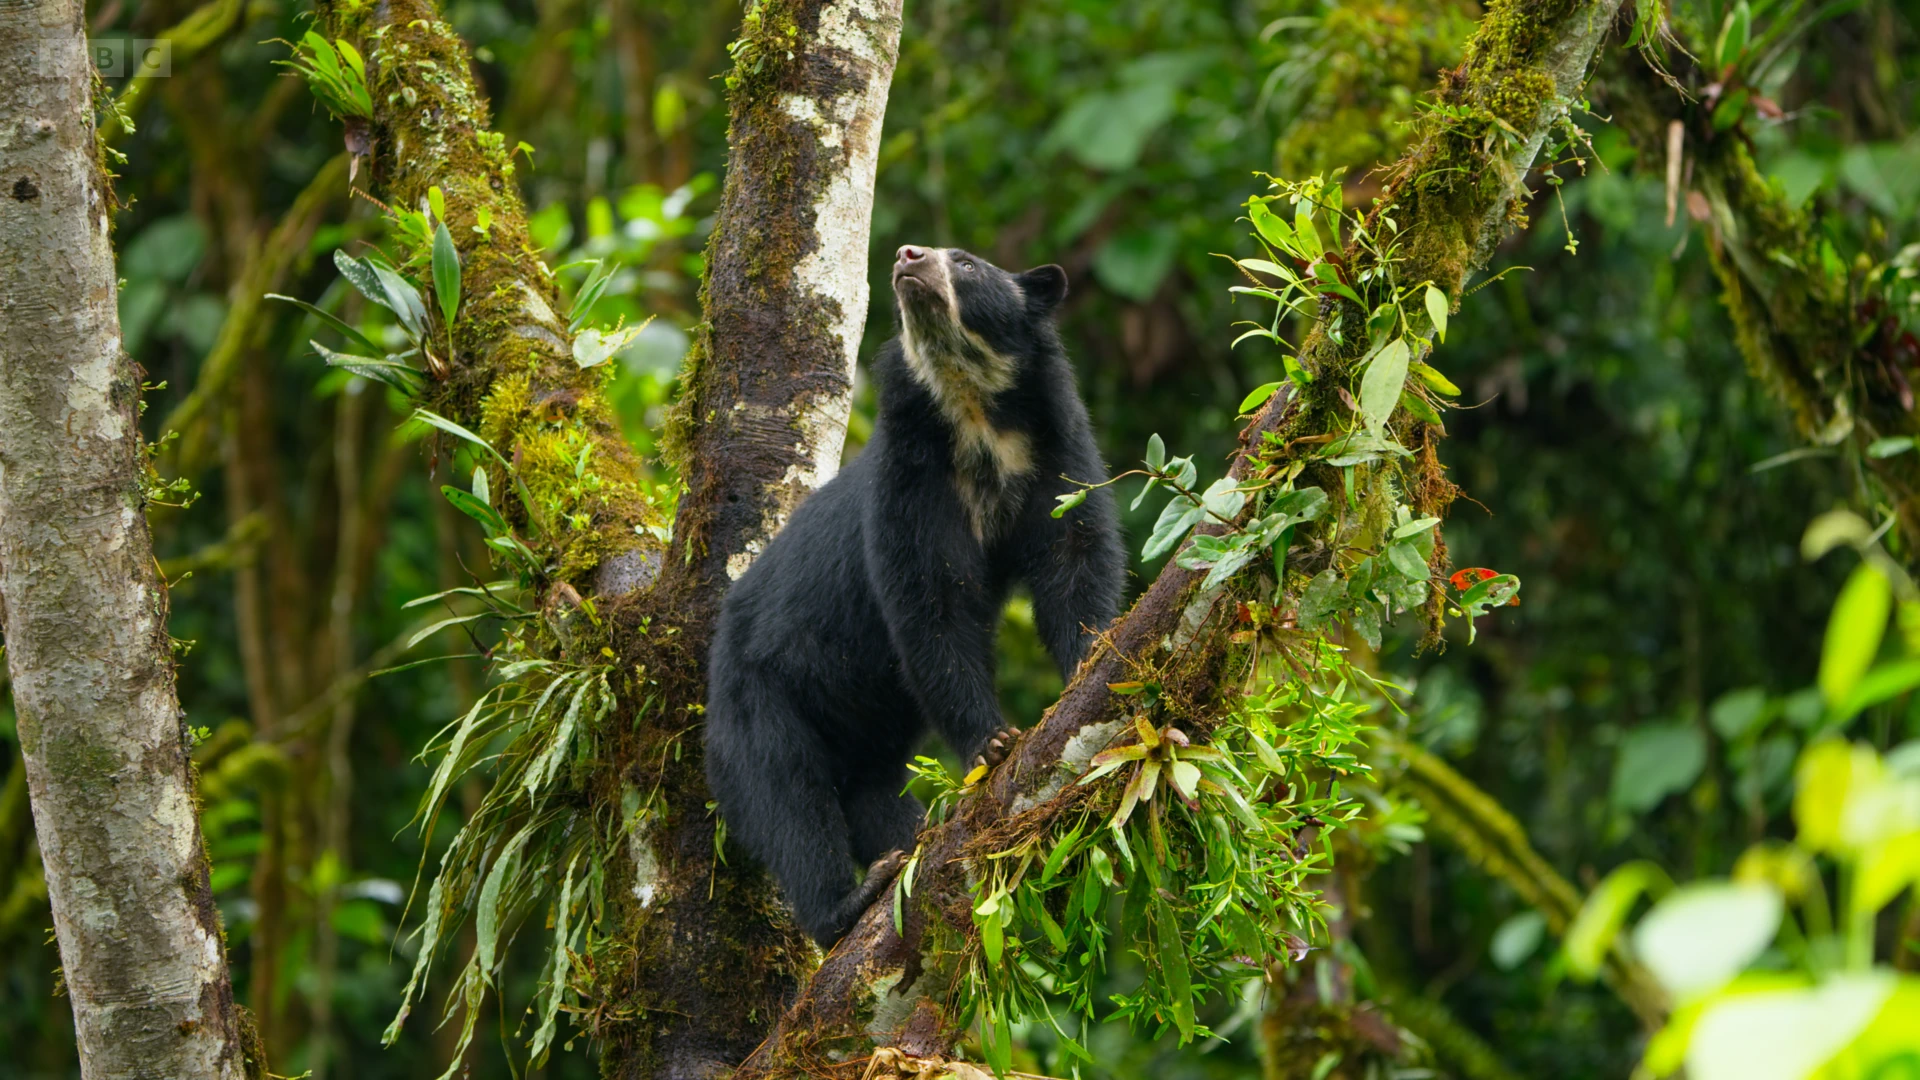 Spectacled bear (Tremarctos ornatus) as shown in Seven Worlds, One Planet - South America